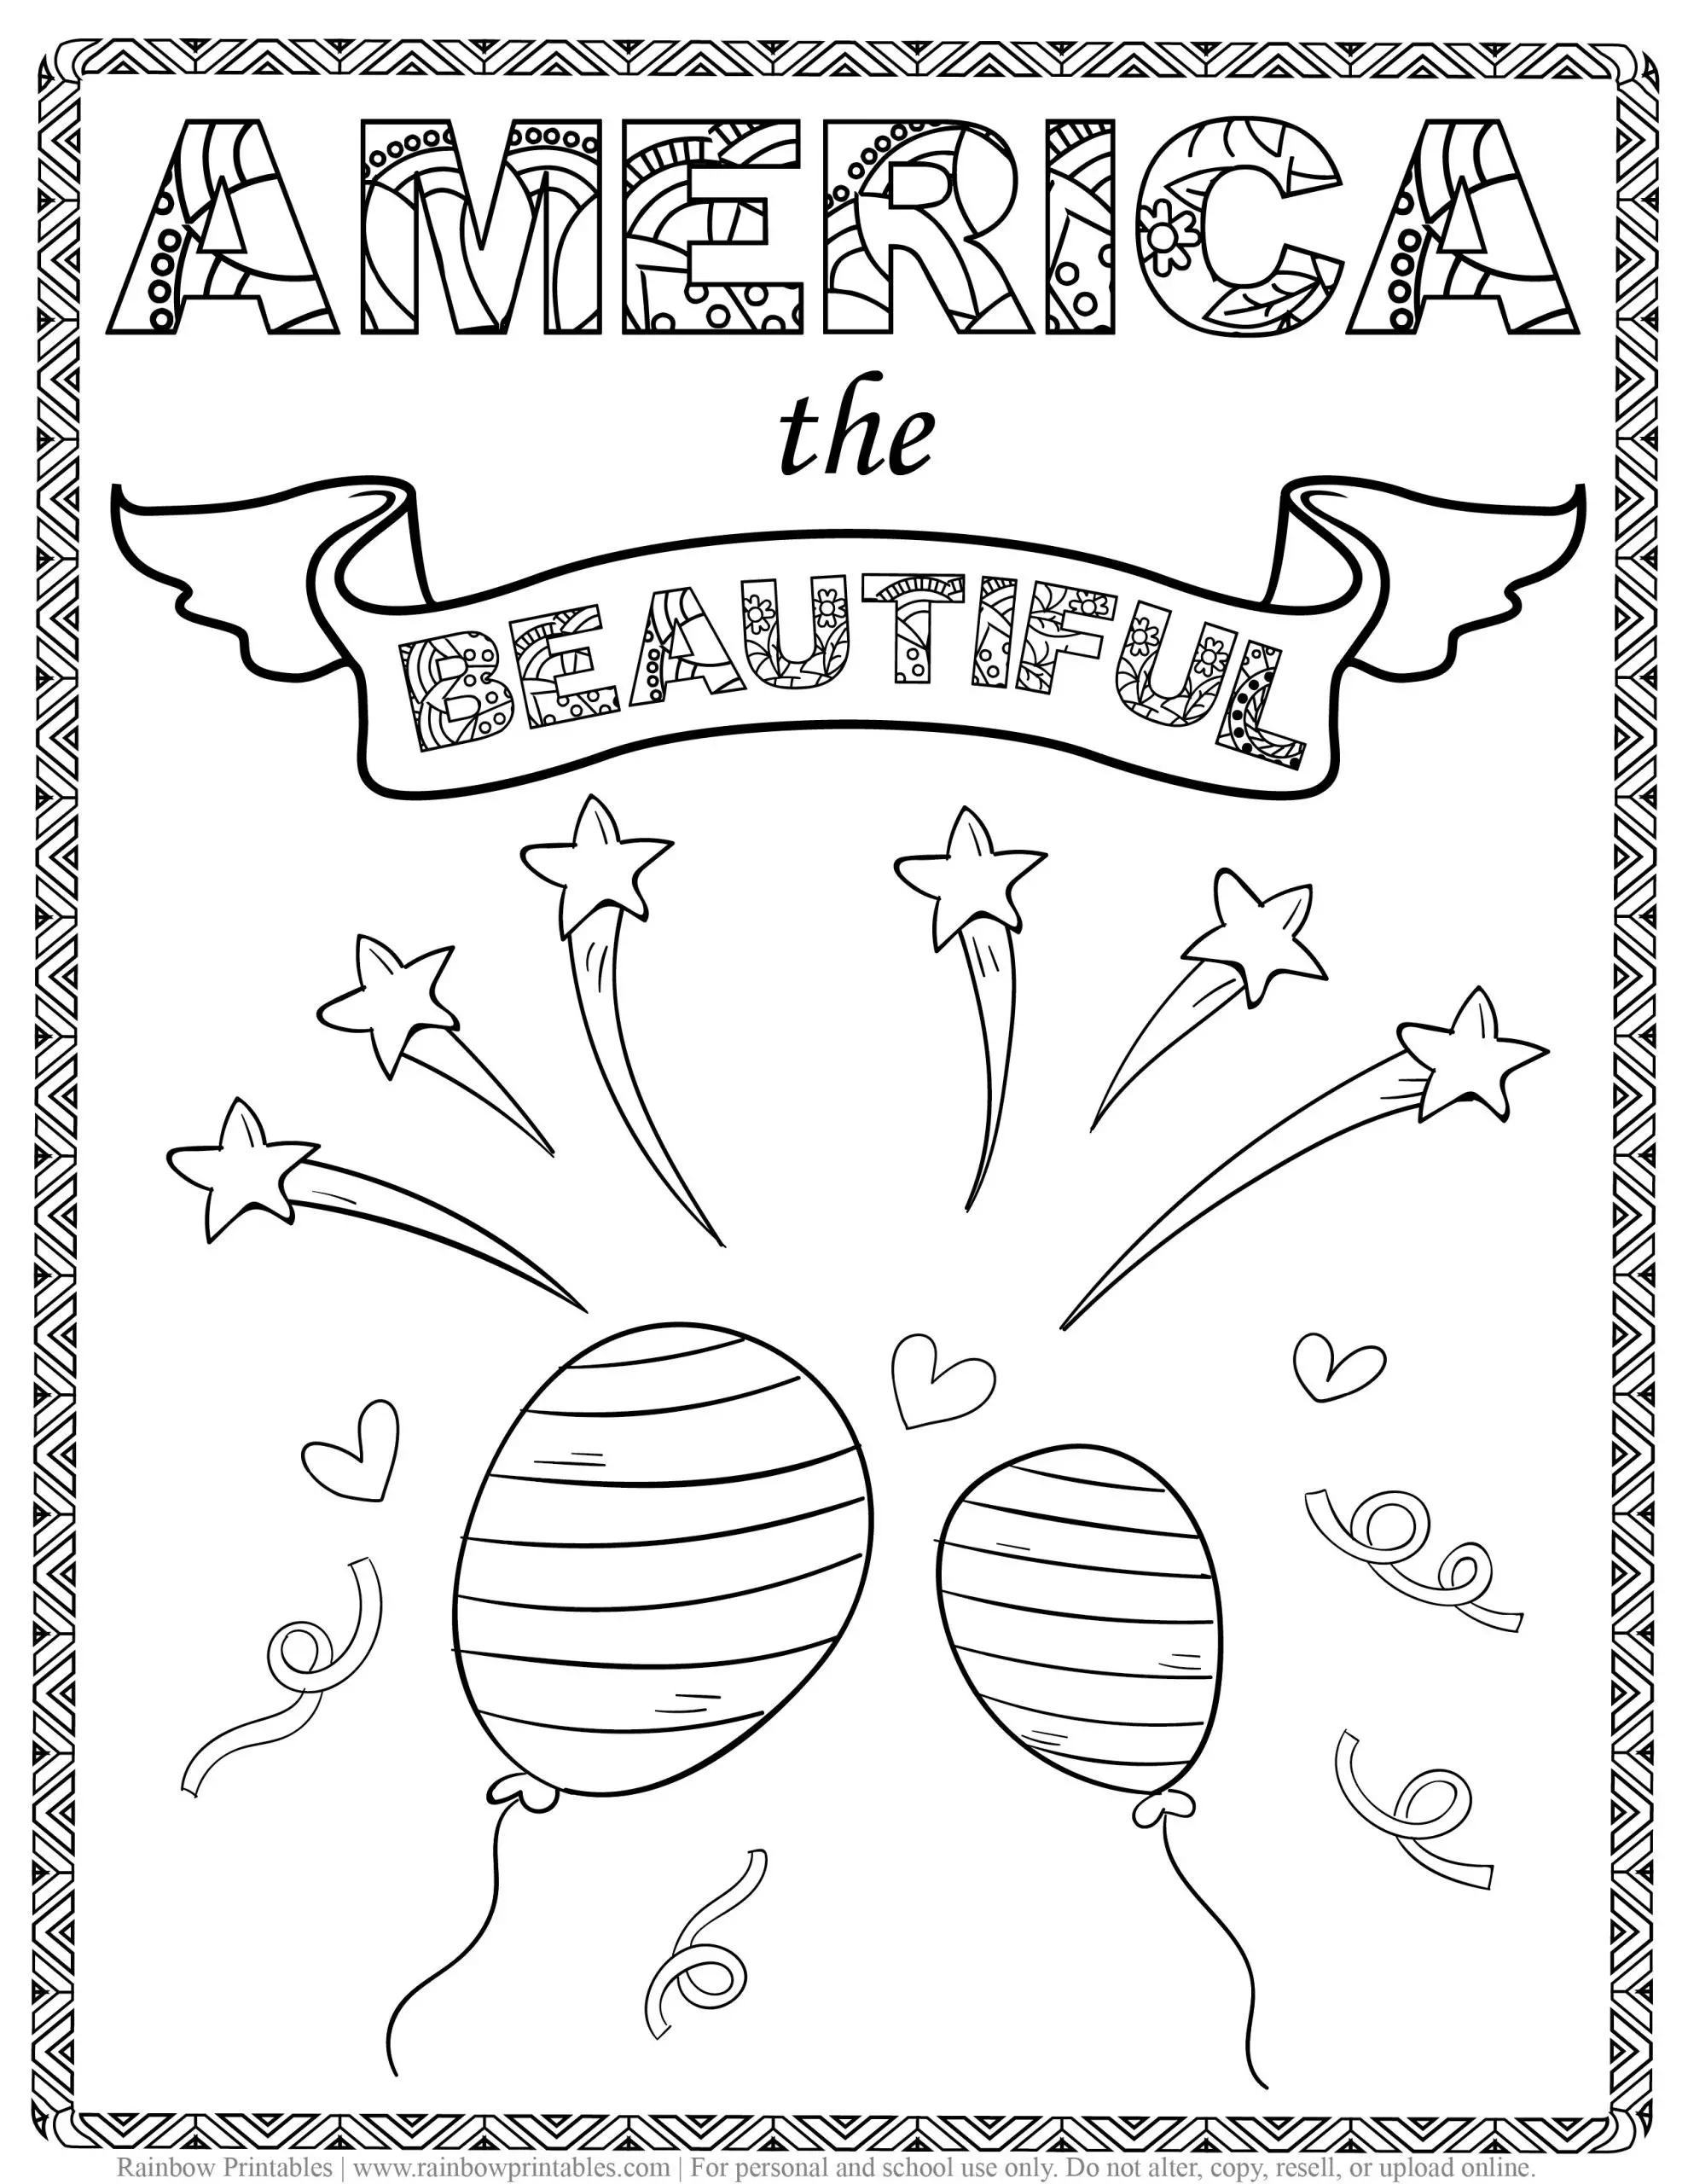 America The Beautiful Coloring Page, Kids Patriotic July 4th Independence Day Printables for Children, Toddlers, Activity for Preschool, Celebrating